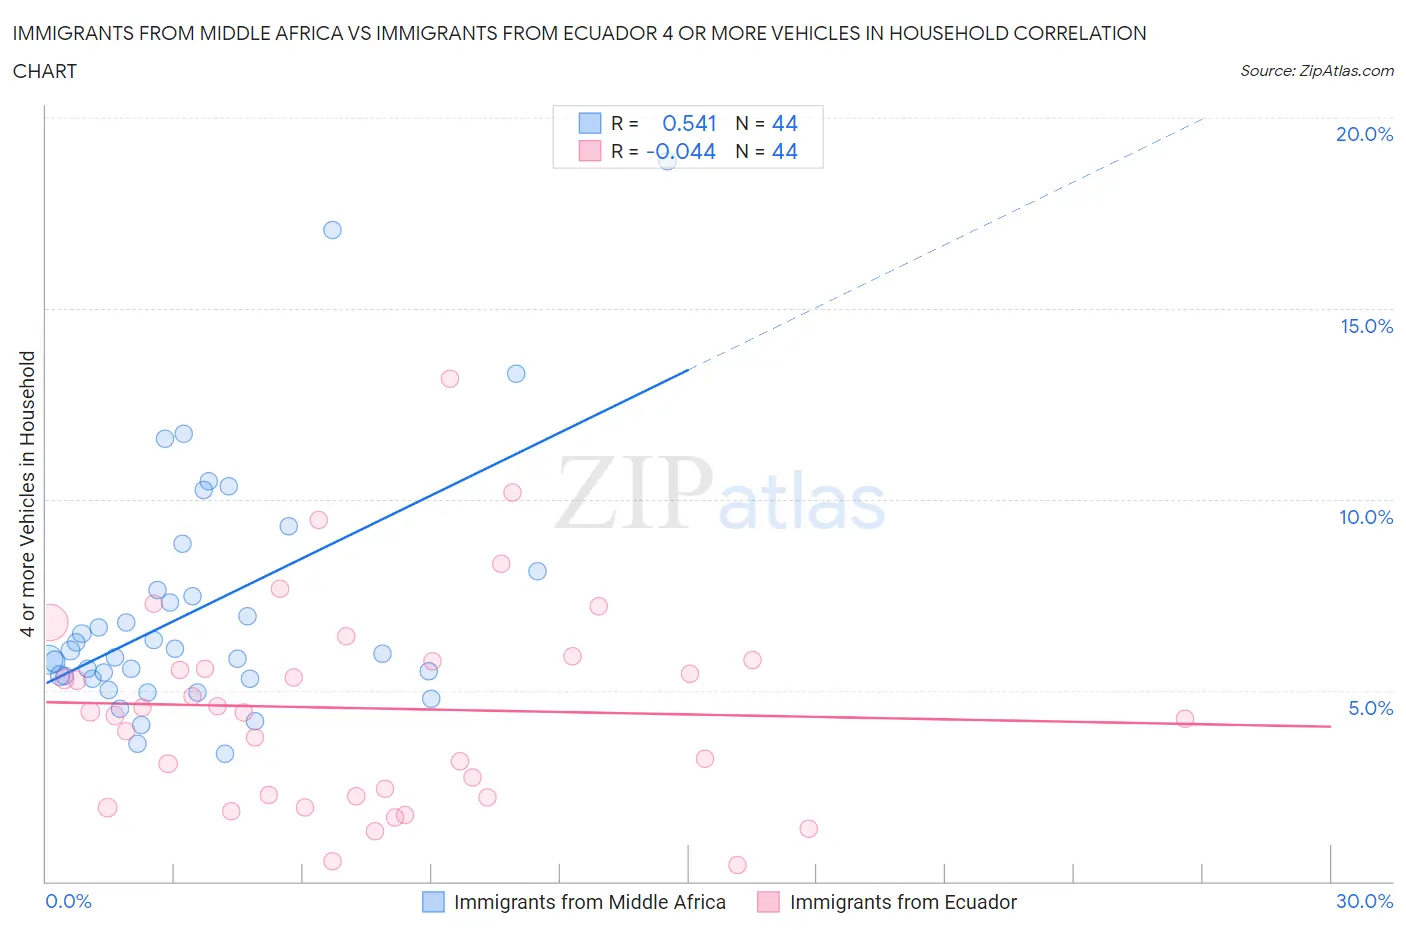 Immigrants from Middle Africa vs Immigrants from Ecuador 4 or more Vehicles in Household